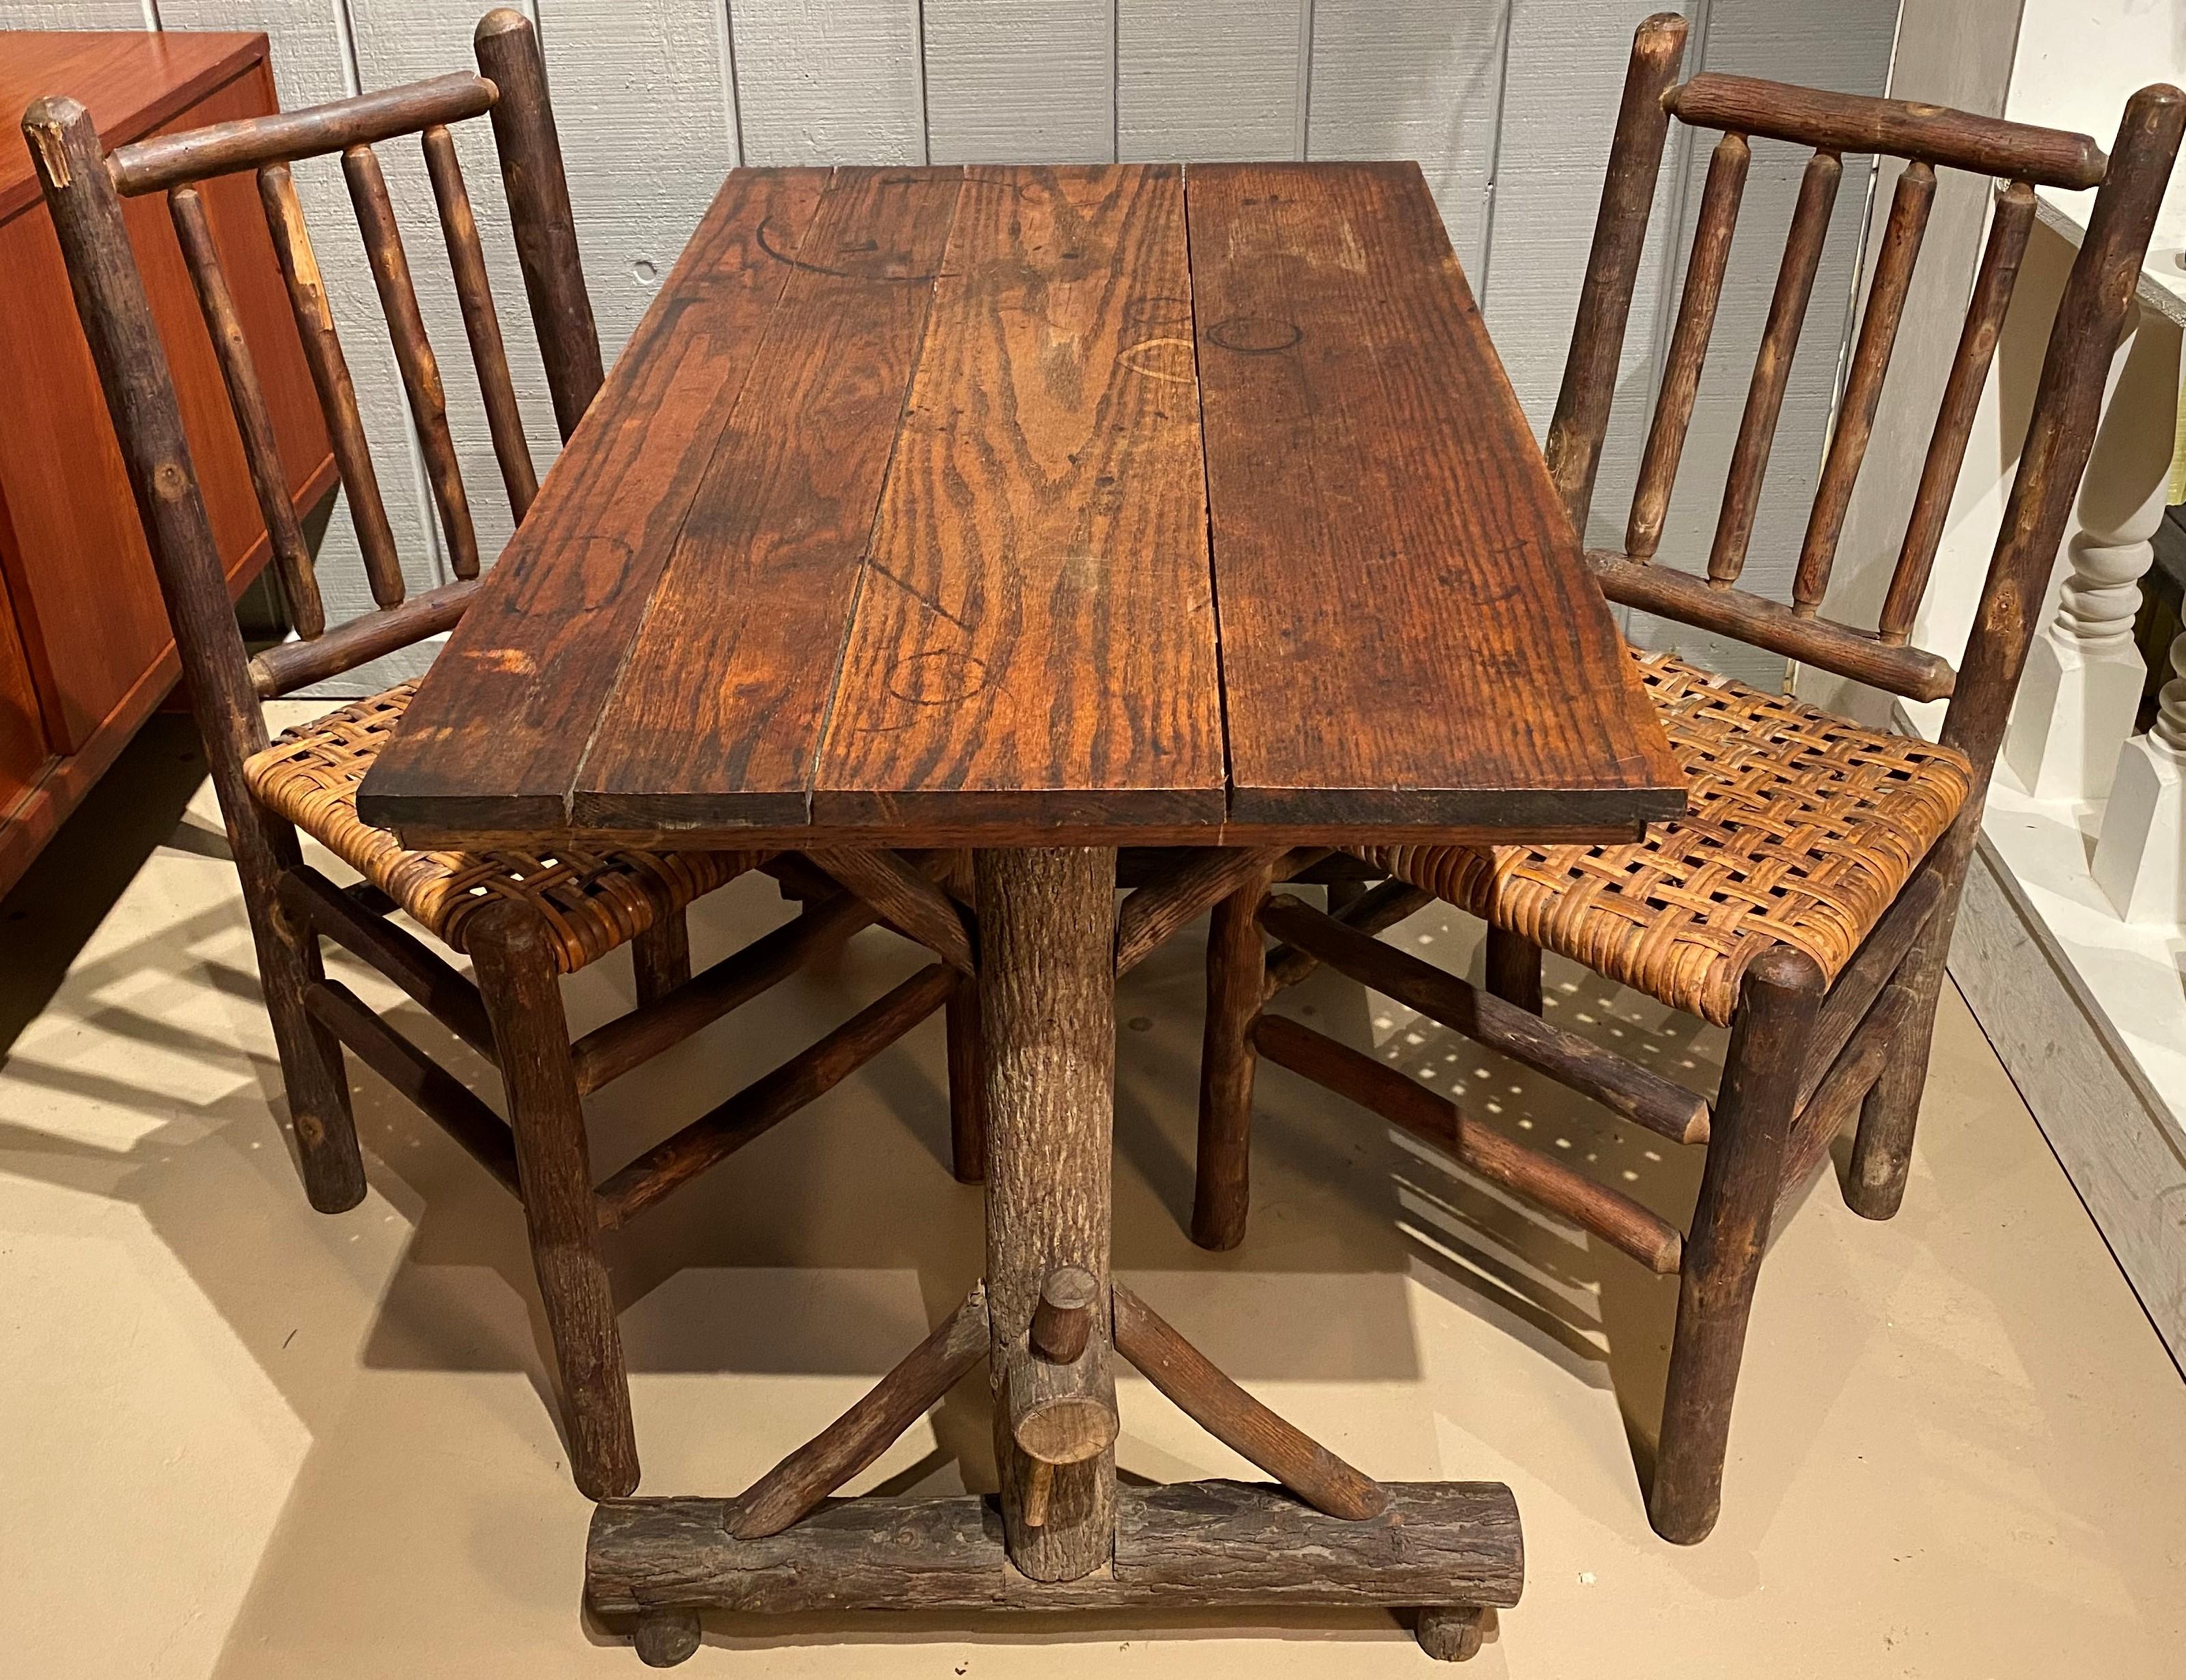 A fine rustic midcentury Davenport form table with two matching side chairs with rattan seats by Old Hickory, Martinsville, IN. The table features a three oak board top and is signed with the Old Hickory Martinsville Indiana brand on the single